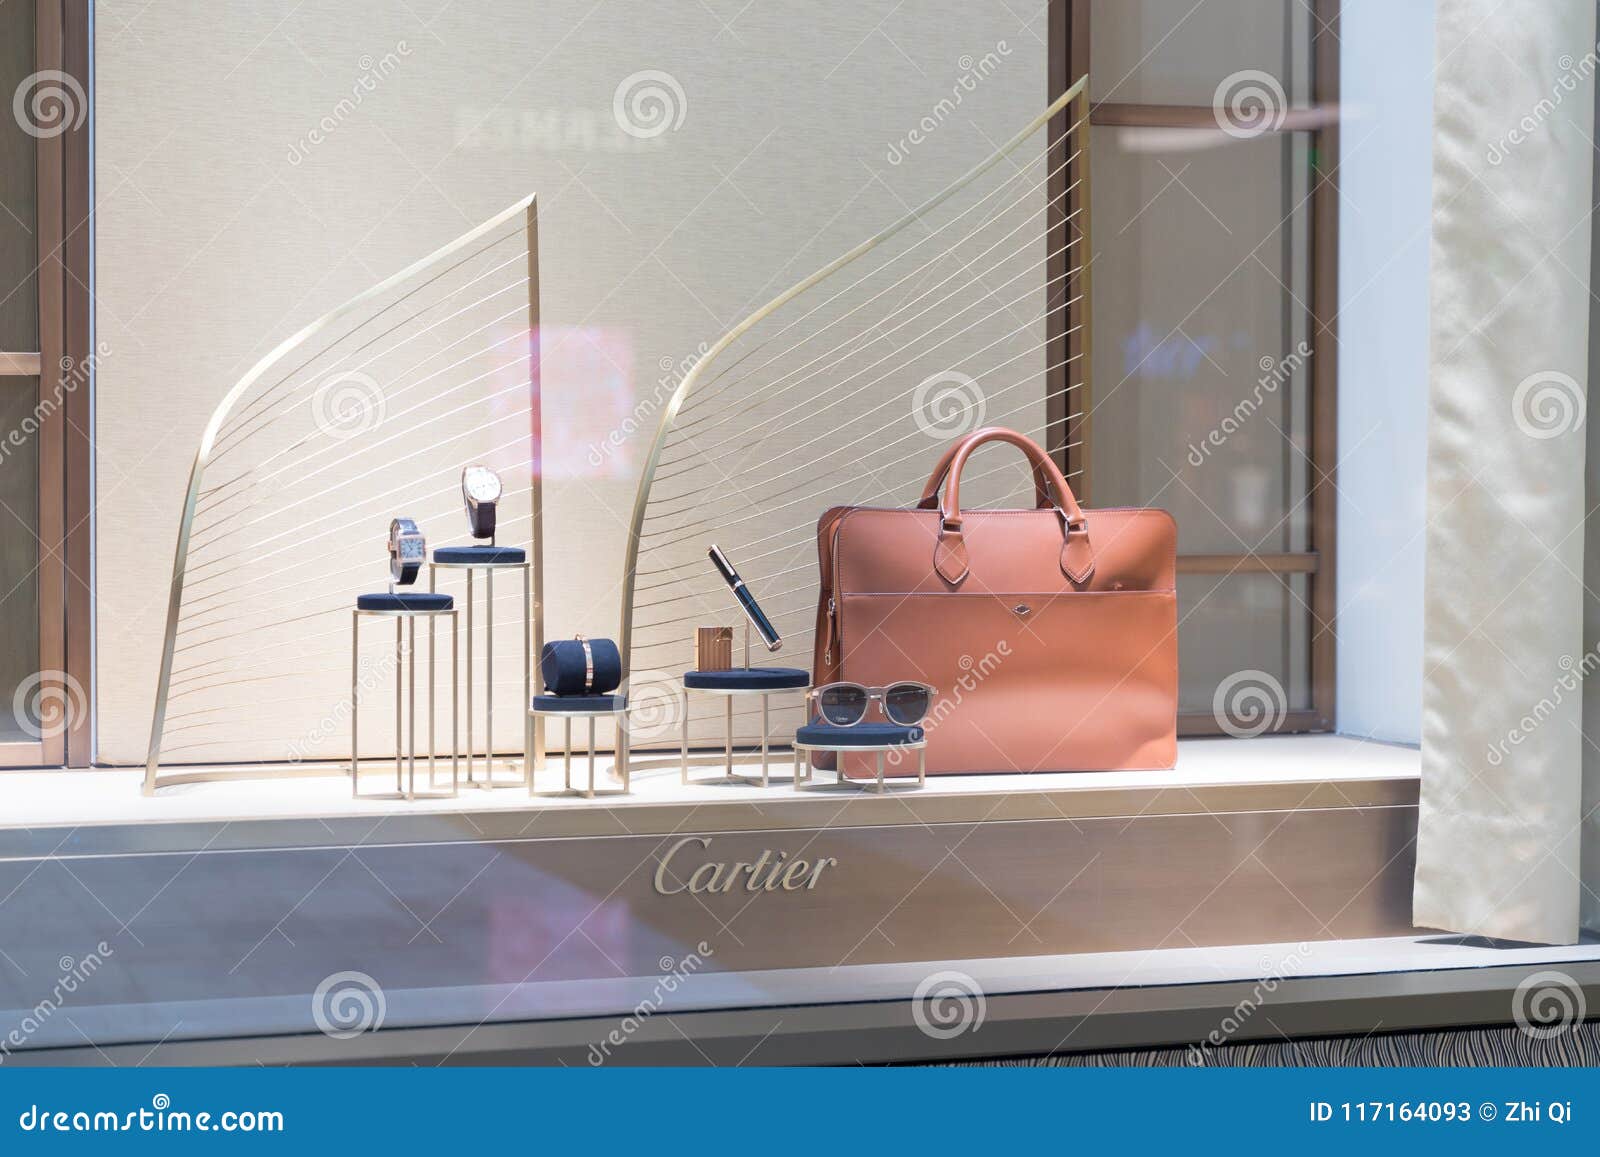 CARTIER Fashion Store Front Editorial 